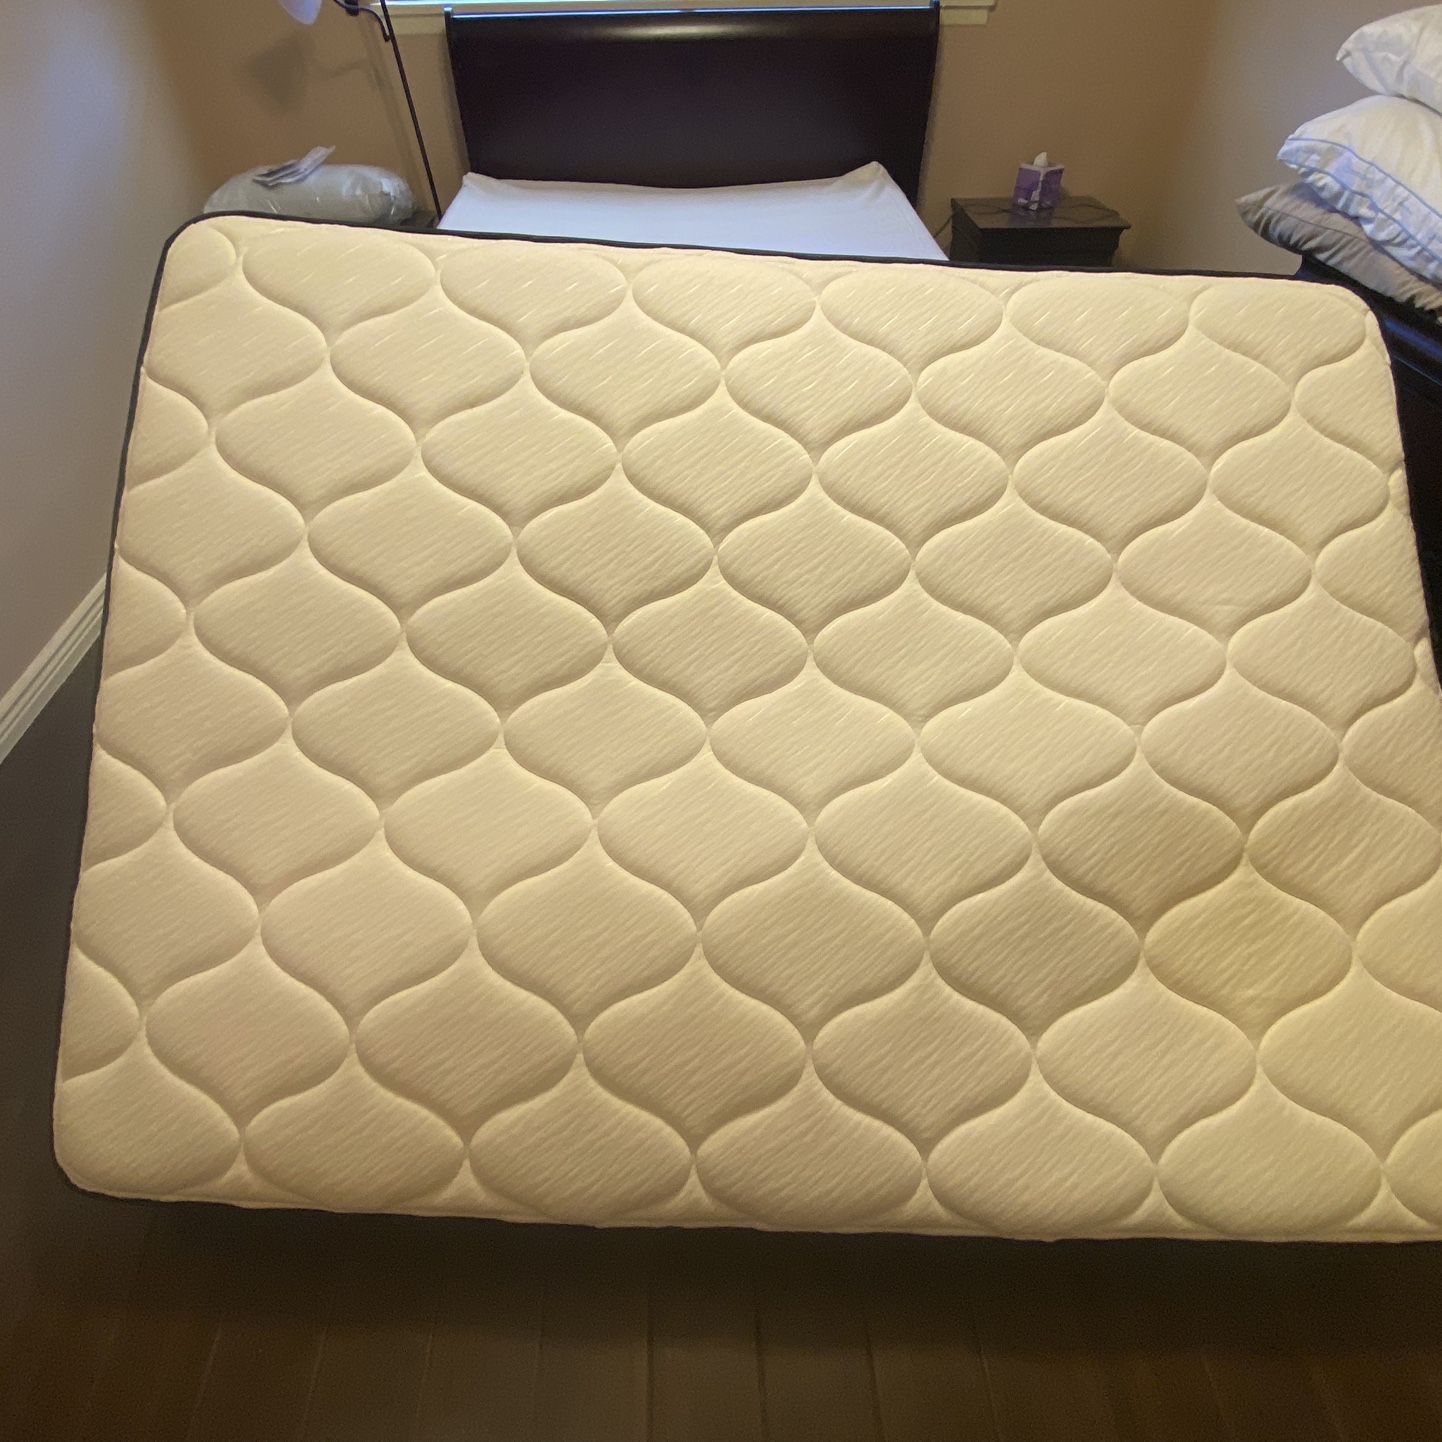 Two queen-sized mattresses